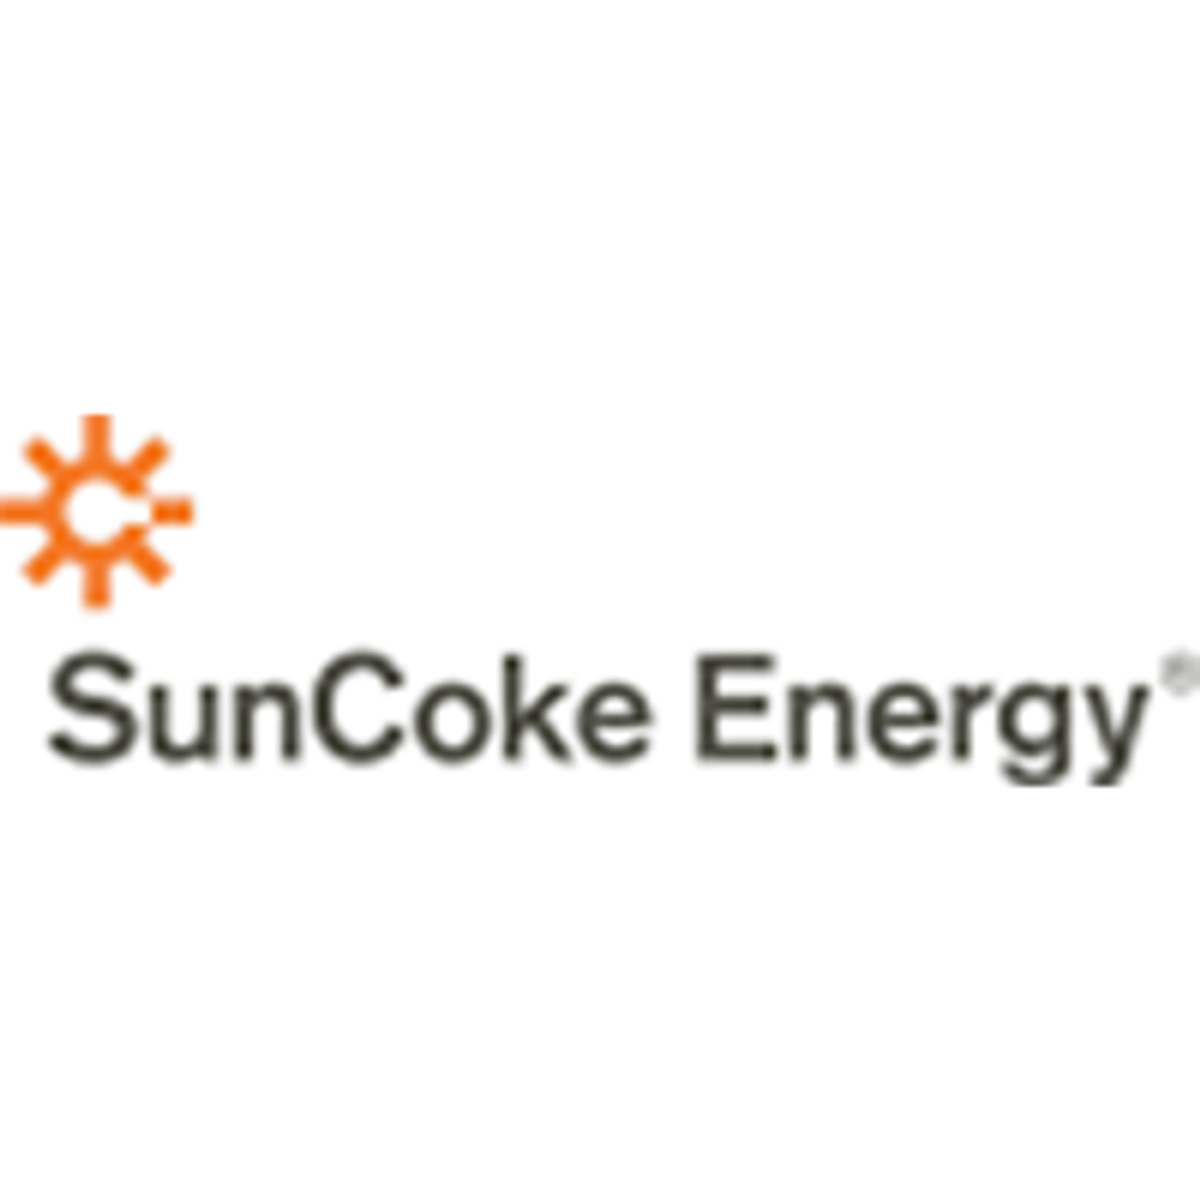 SUNCOKE ENERGY, INC. INCREASES QUARTERLY CASH DIVIDEND TO $0.08 PER SHARE